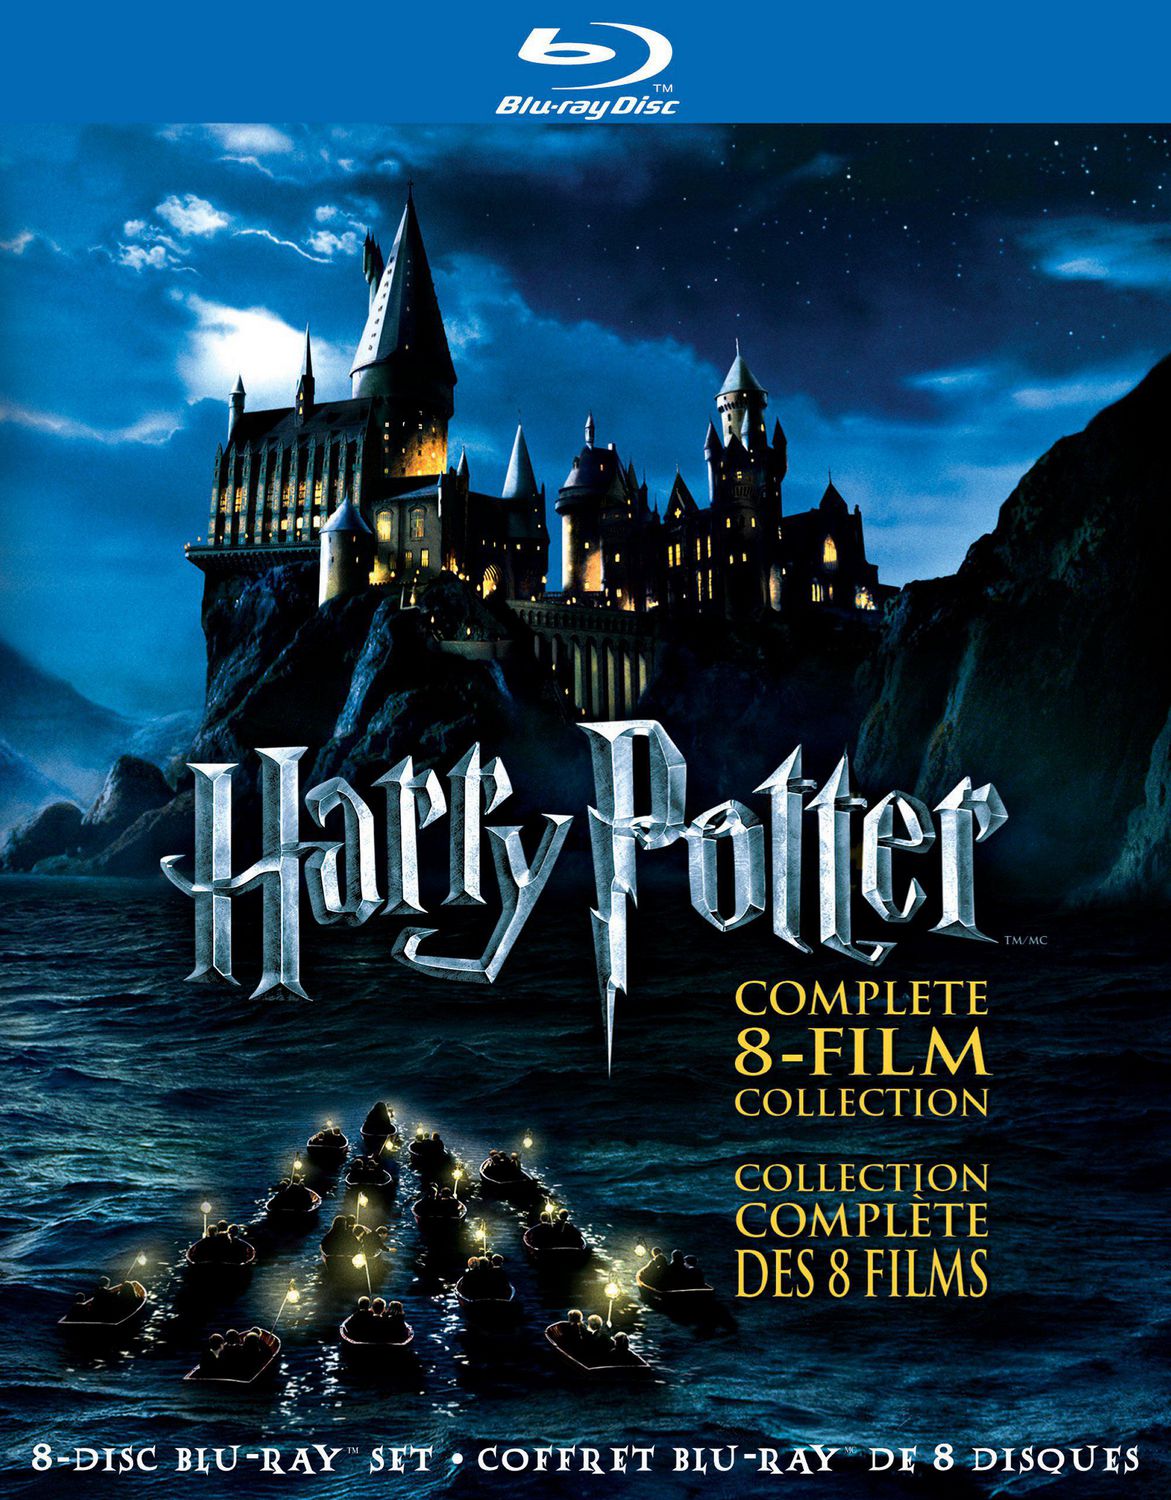 Harry Potter 4-Film Collection: Years 1-4 (DVD) (Walmart Exclusive)